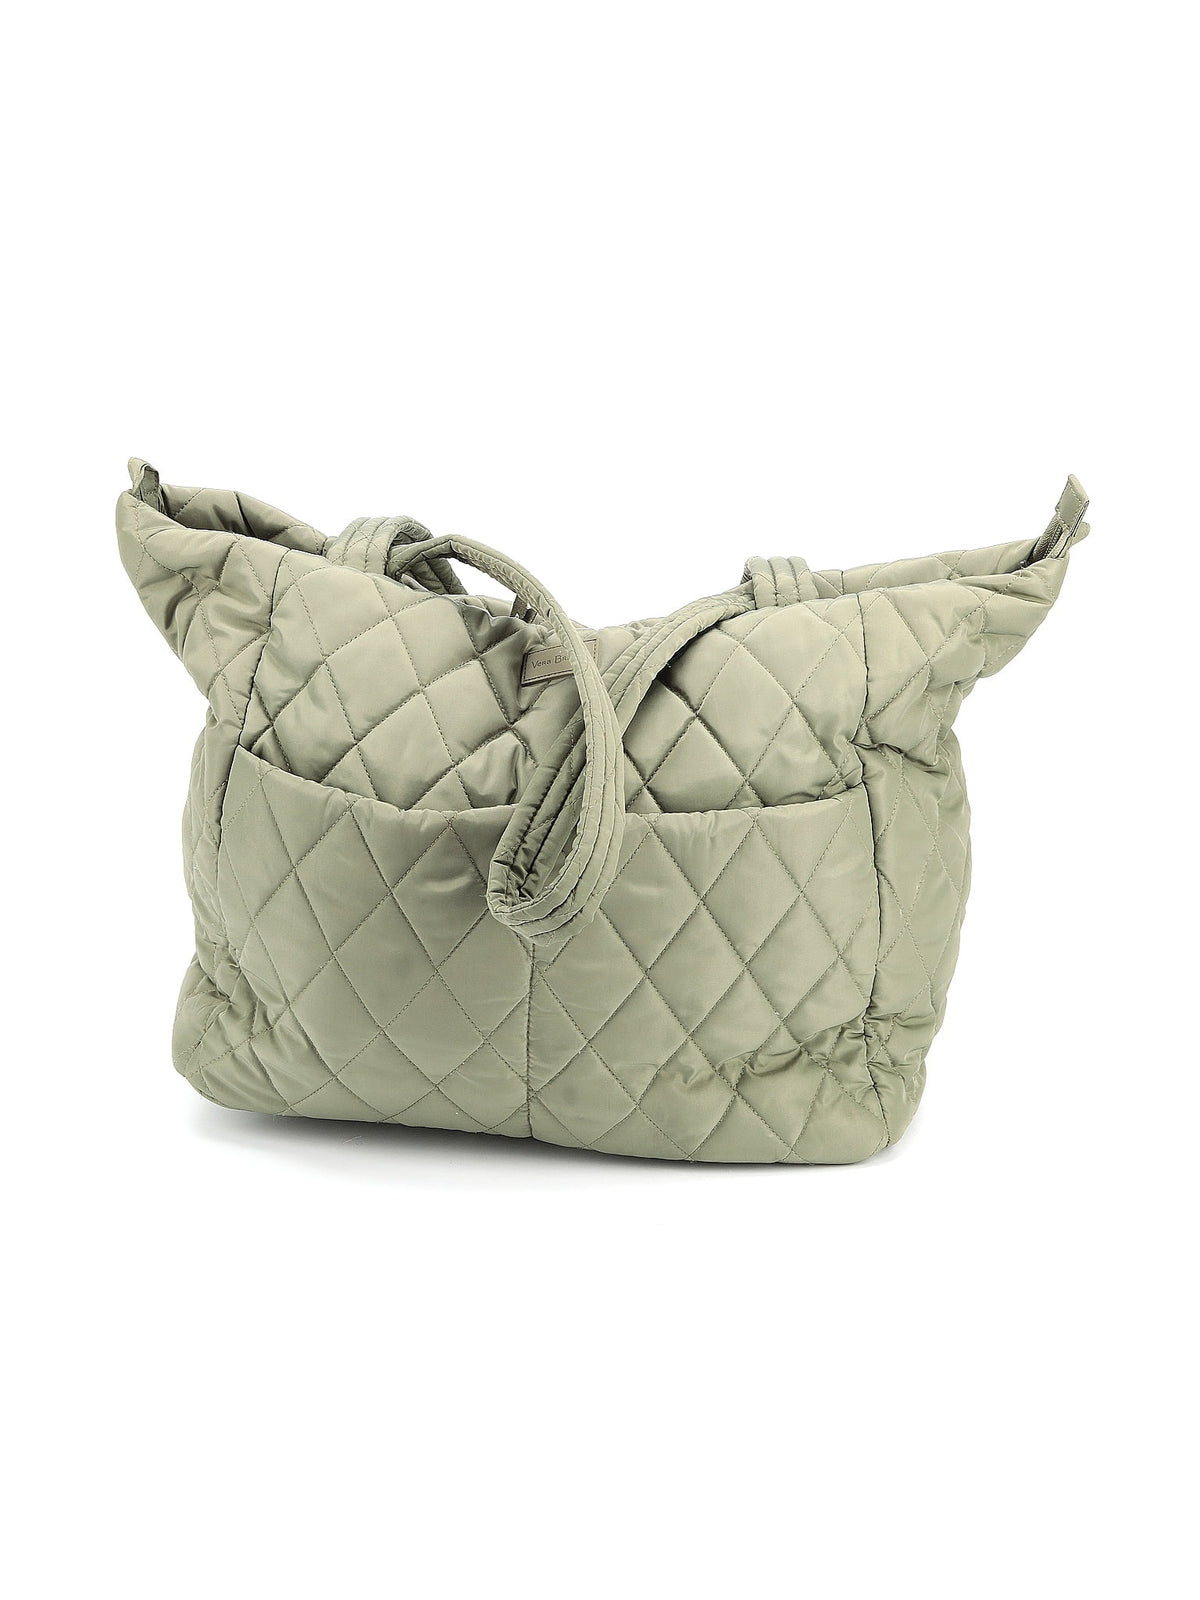 Sage Ultralight Dual Strap Tote size - One Size